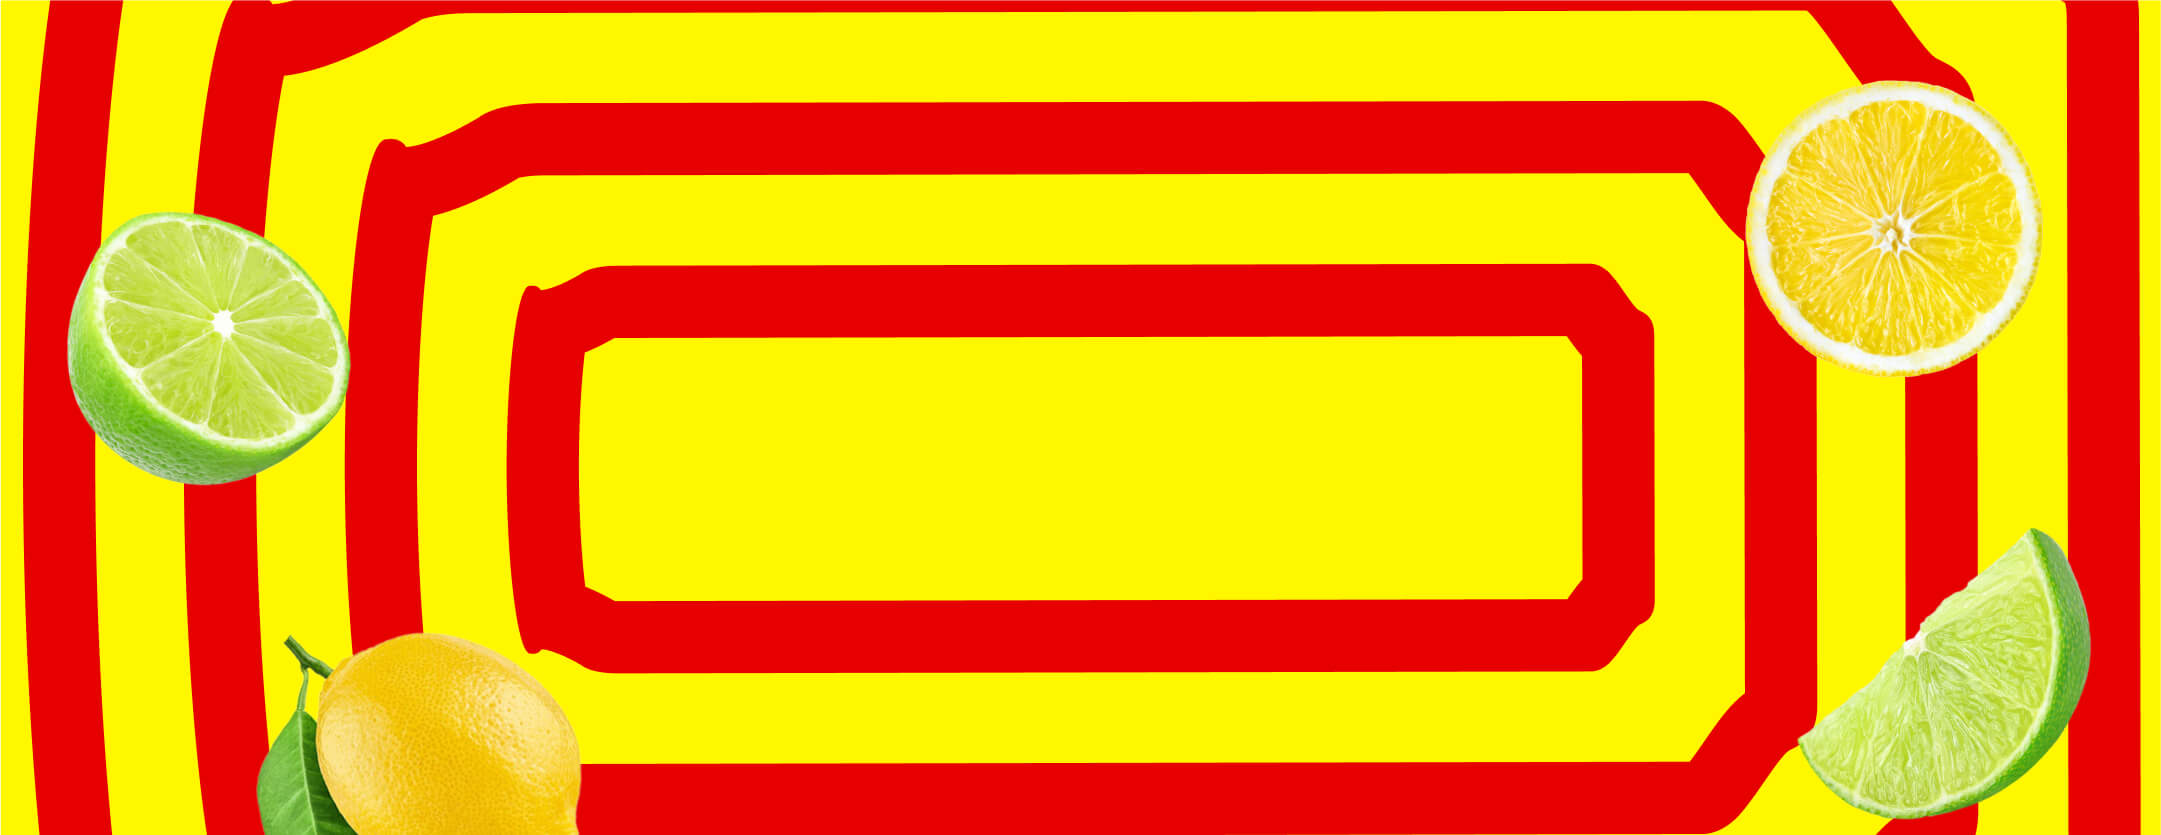 Yellow background with red stripes, lemons, and limes